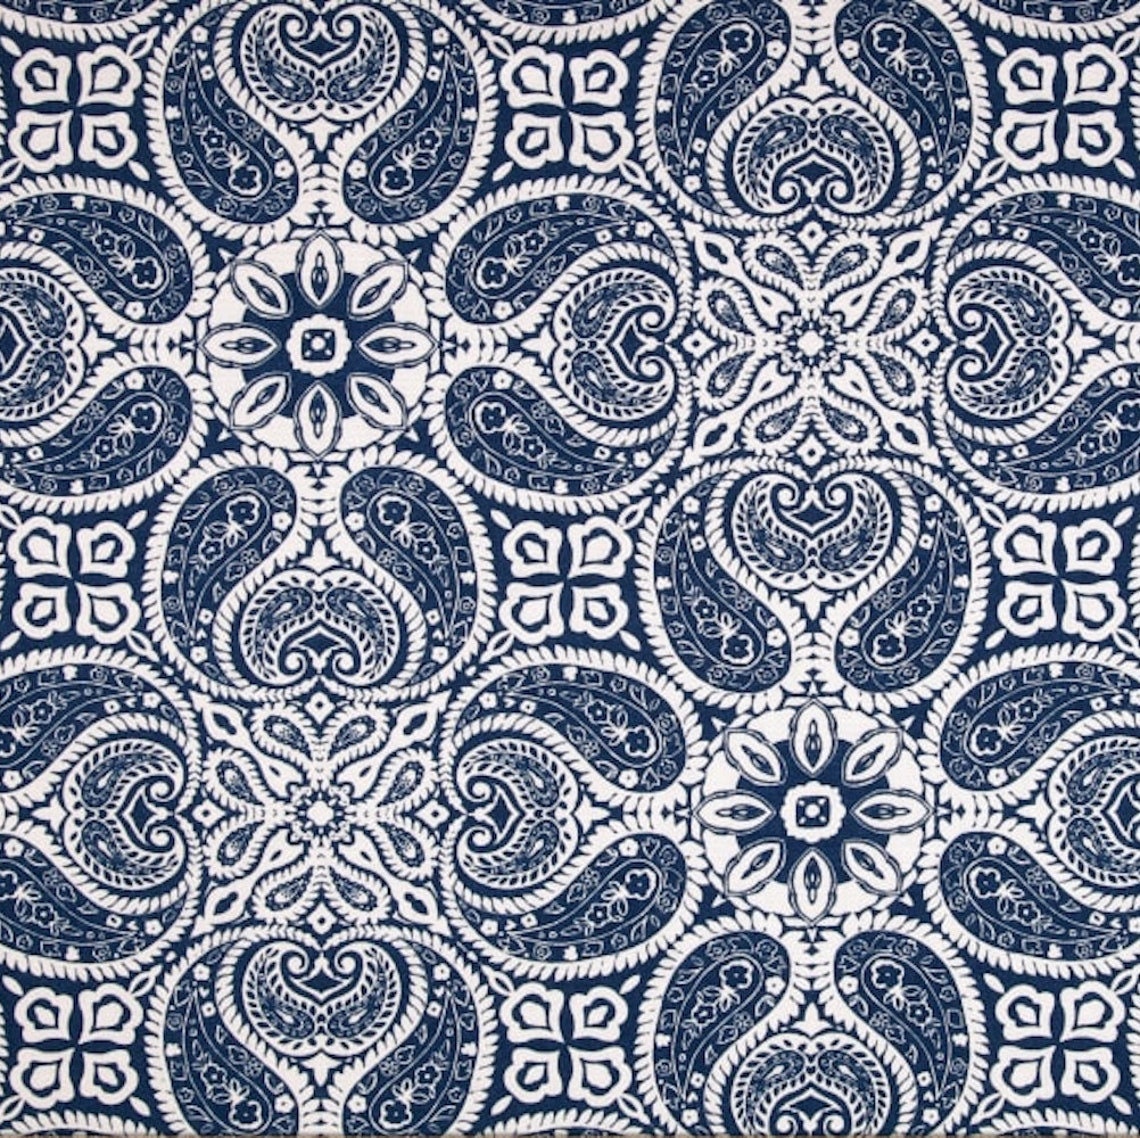 round tablecloth in tibi navy blue geometric paisley